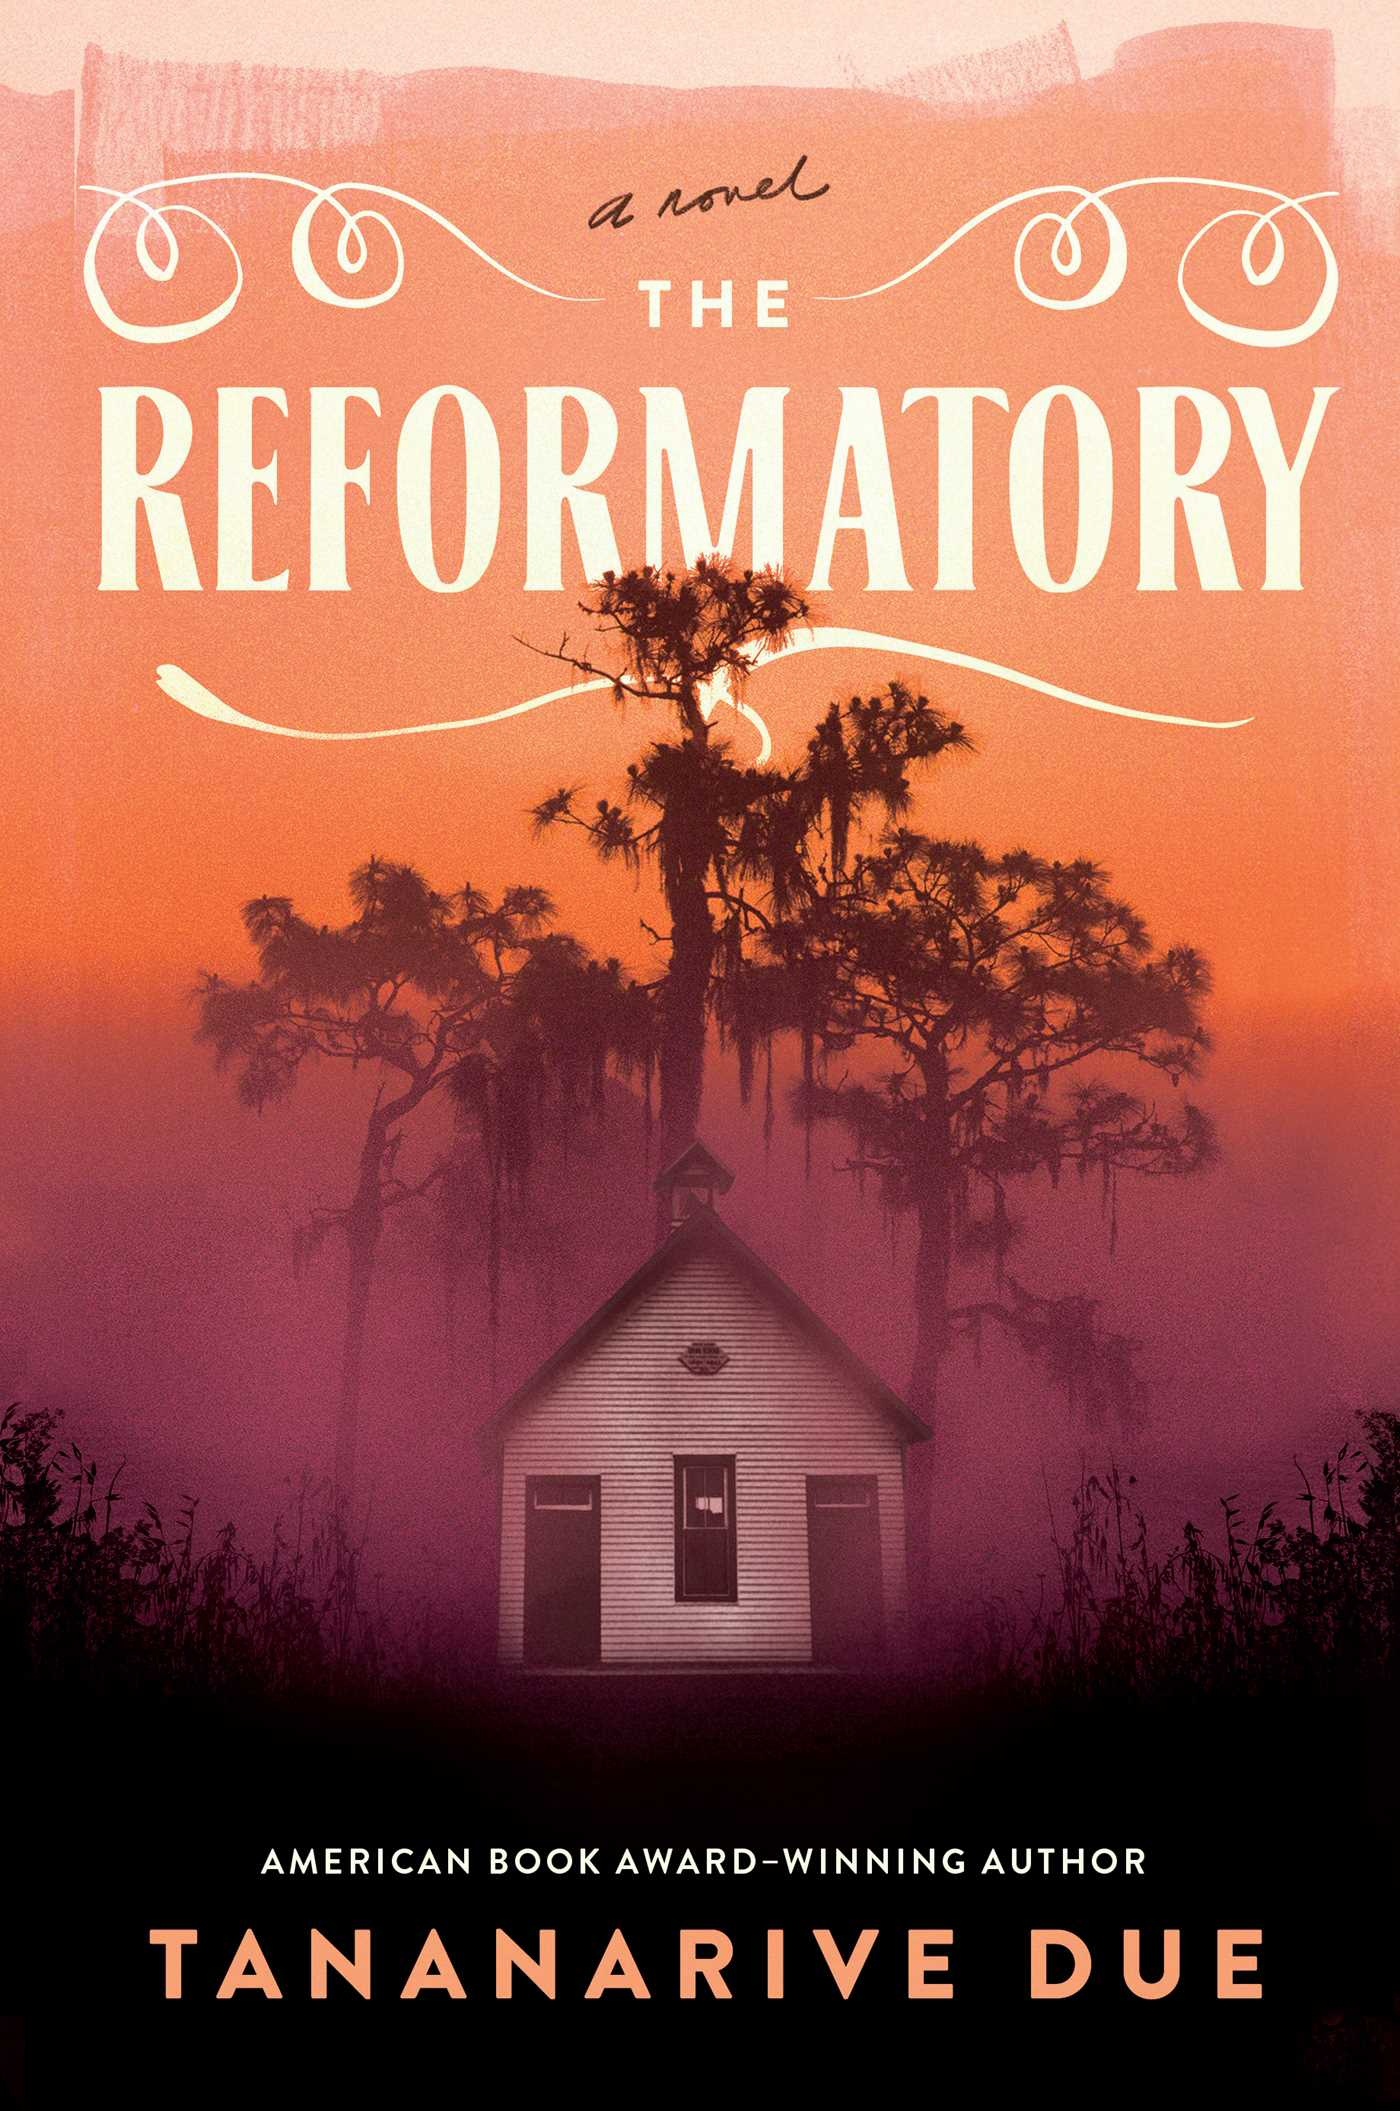 NDG Book Review: ‘The Reformatory’ is all kinds of scary wrapped in one book